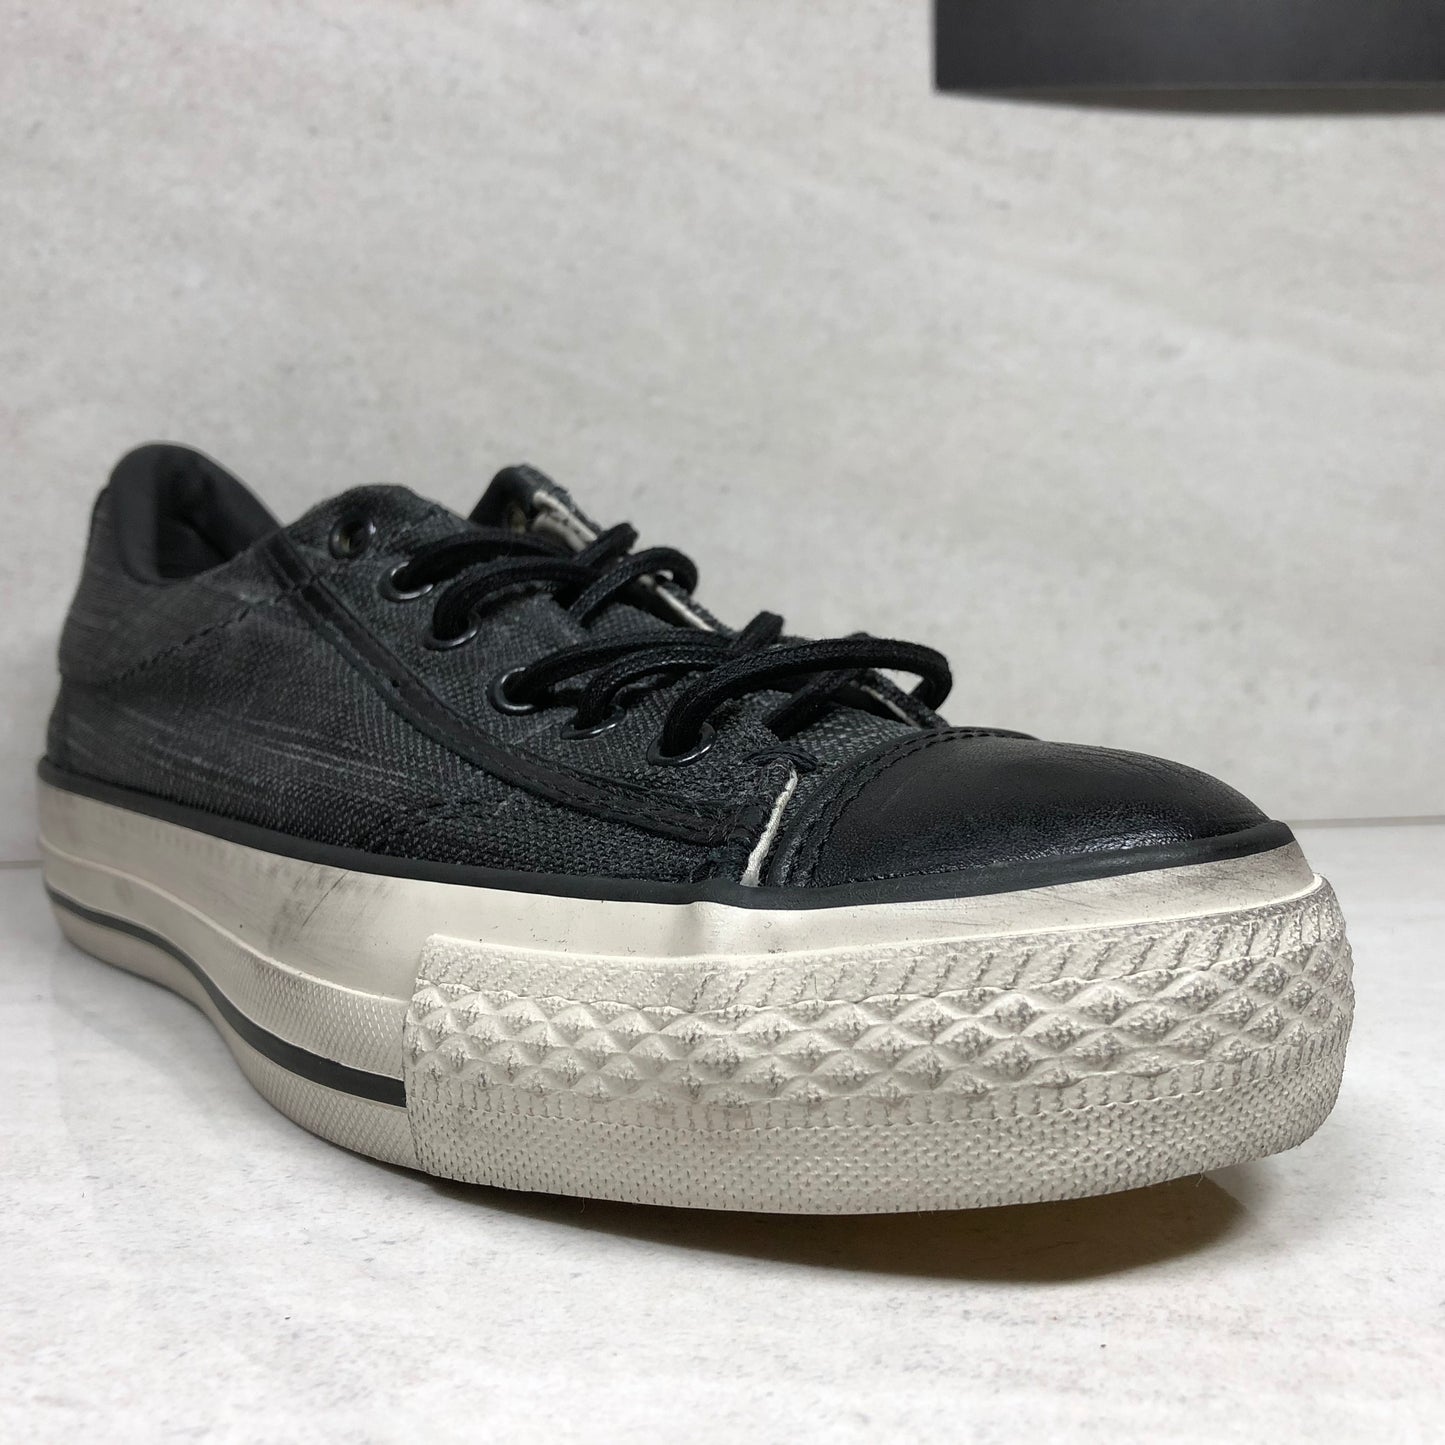 DS Converse Chuck Taylor Coated Canvas Low Top Size 3-6.5M/5-8.5W Black 150179C